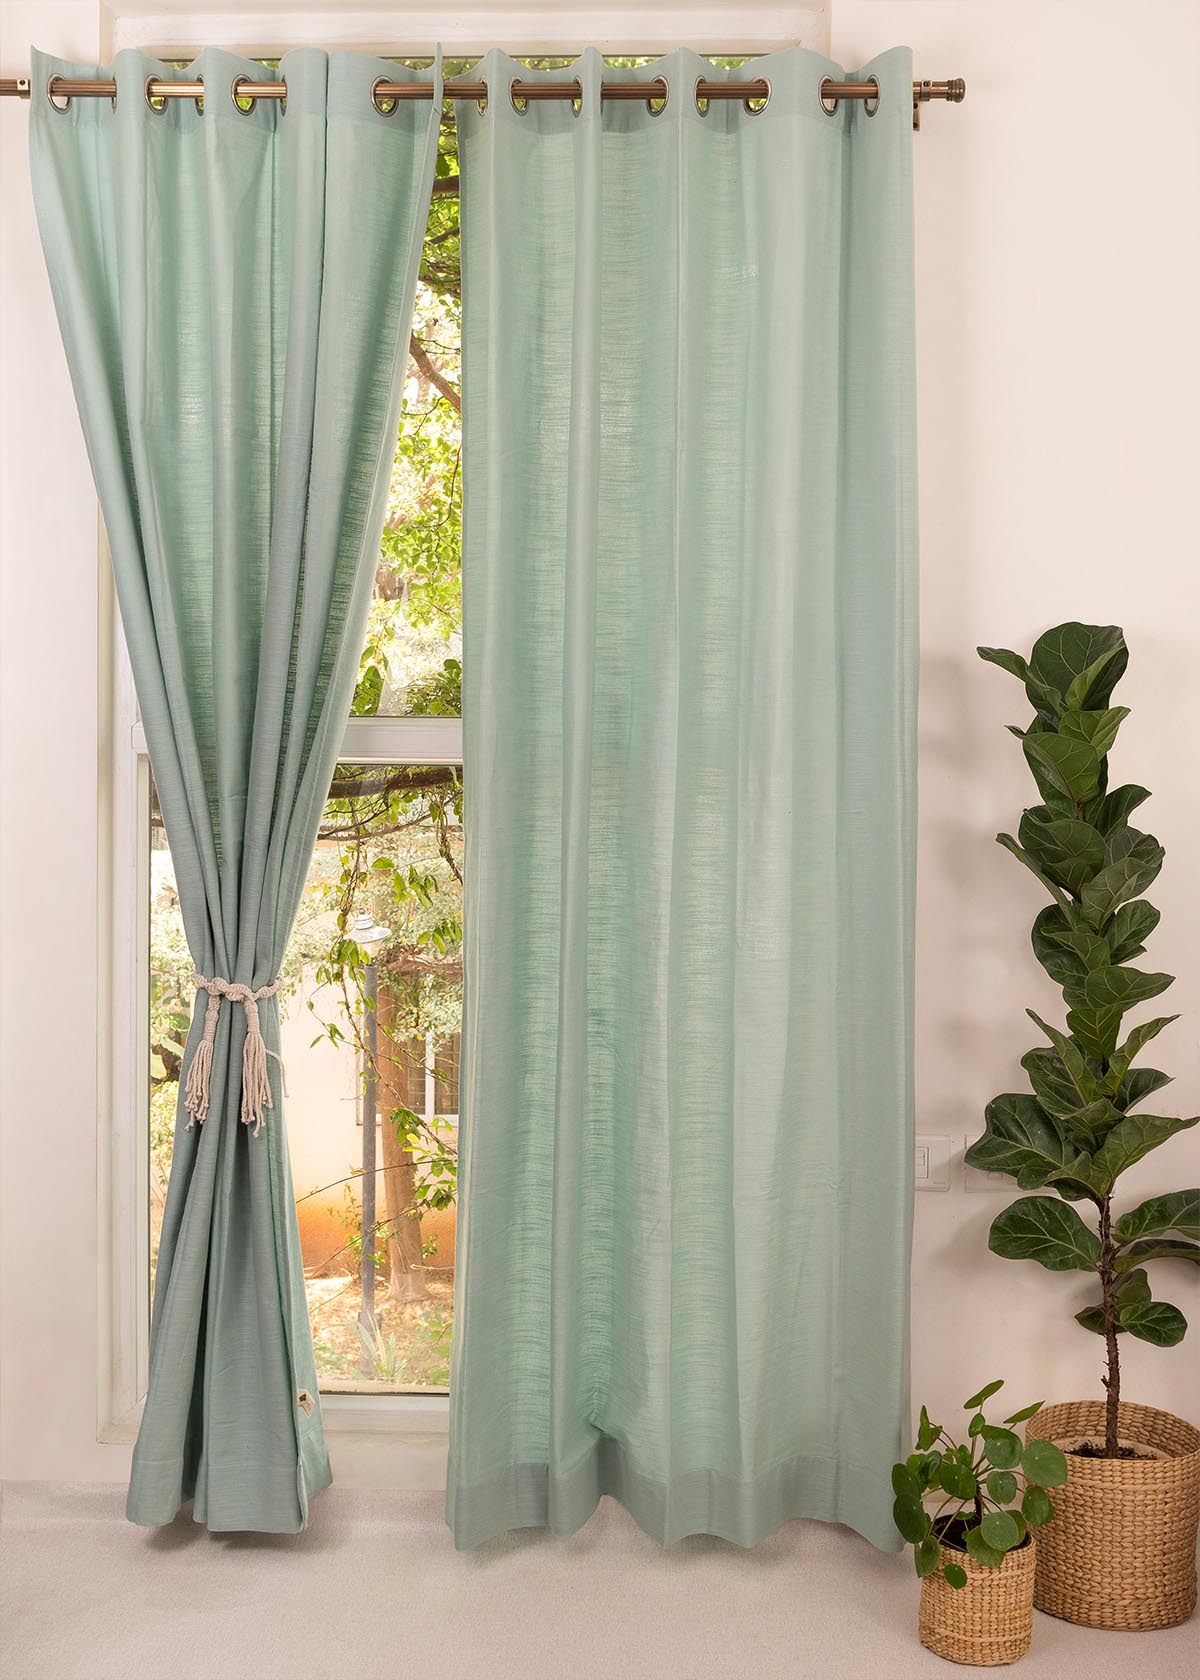 Solid Nile Blue 100% Customizable Cotton plain curtain for bedroom - Room darkening